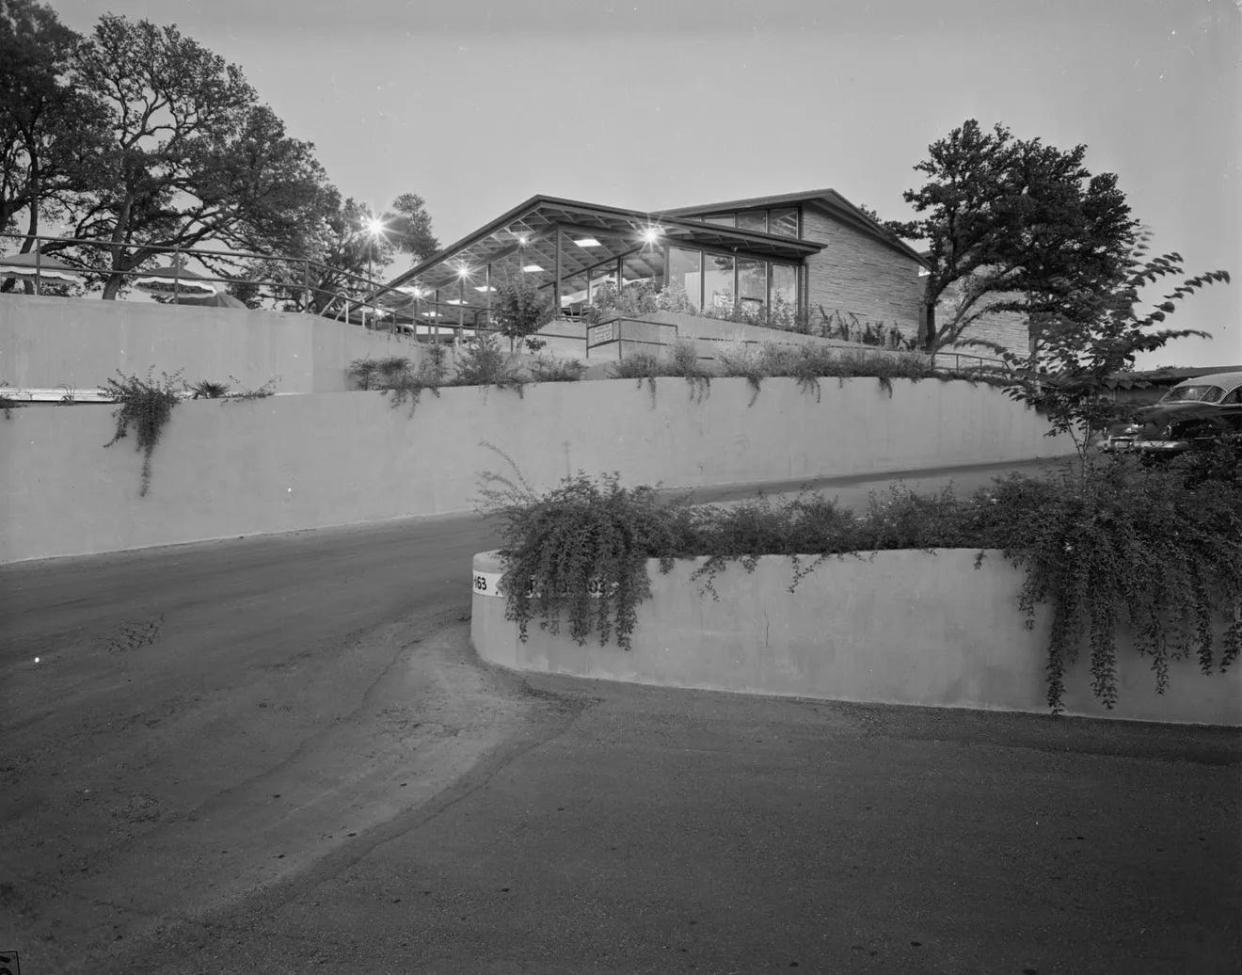 Exterior view of the former Terrace Motor Hotel on South Congress, photographed in 1952 by Dewy Mears.